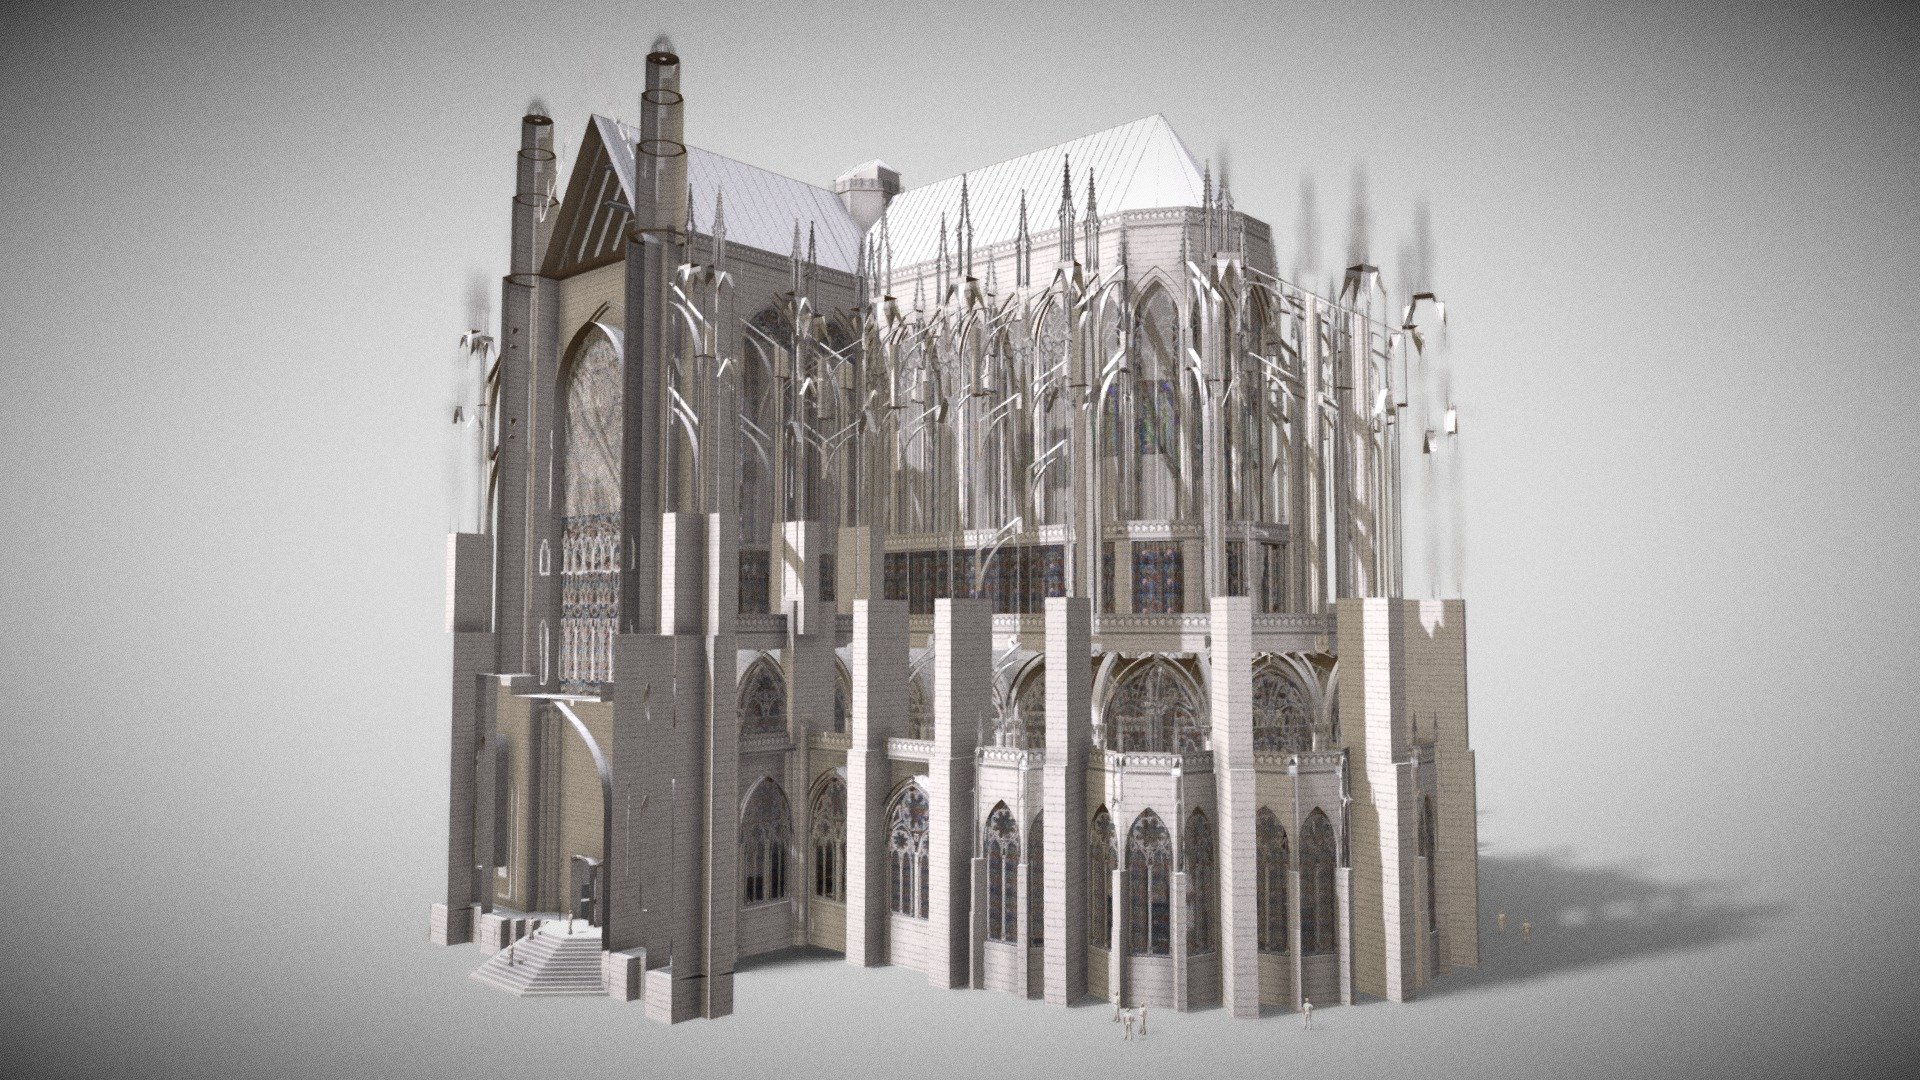 Learn more about this cathedral, by viewing my animated timelapse of construction from the 1220s to present.

Email me for access to the source files behind this model and its construction sequence 3d model